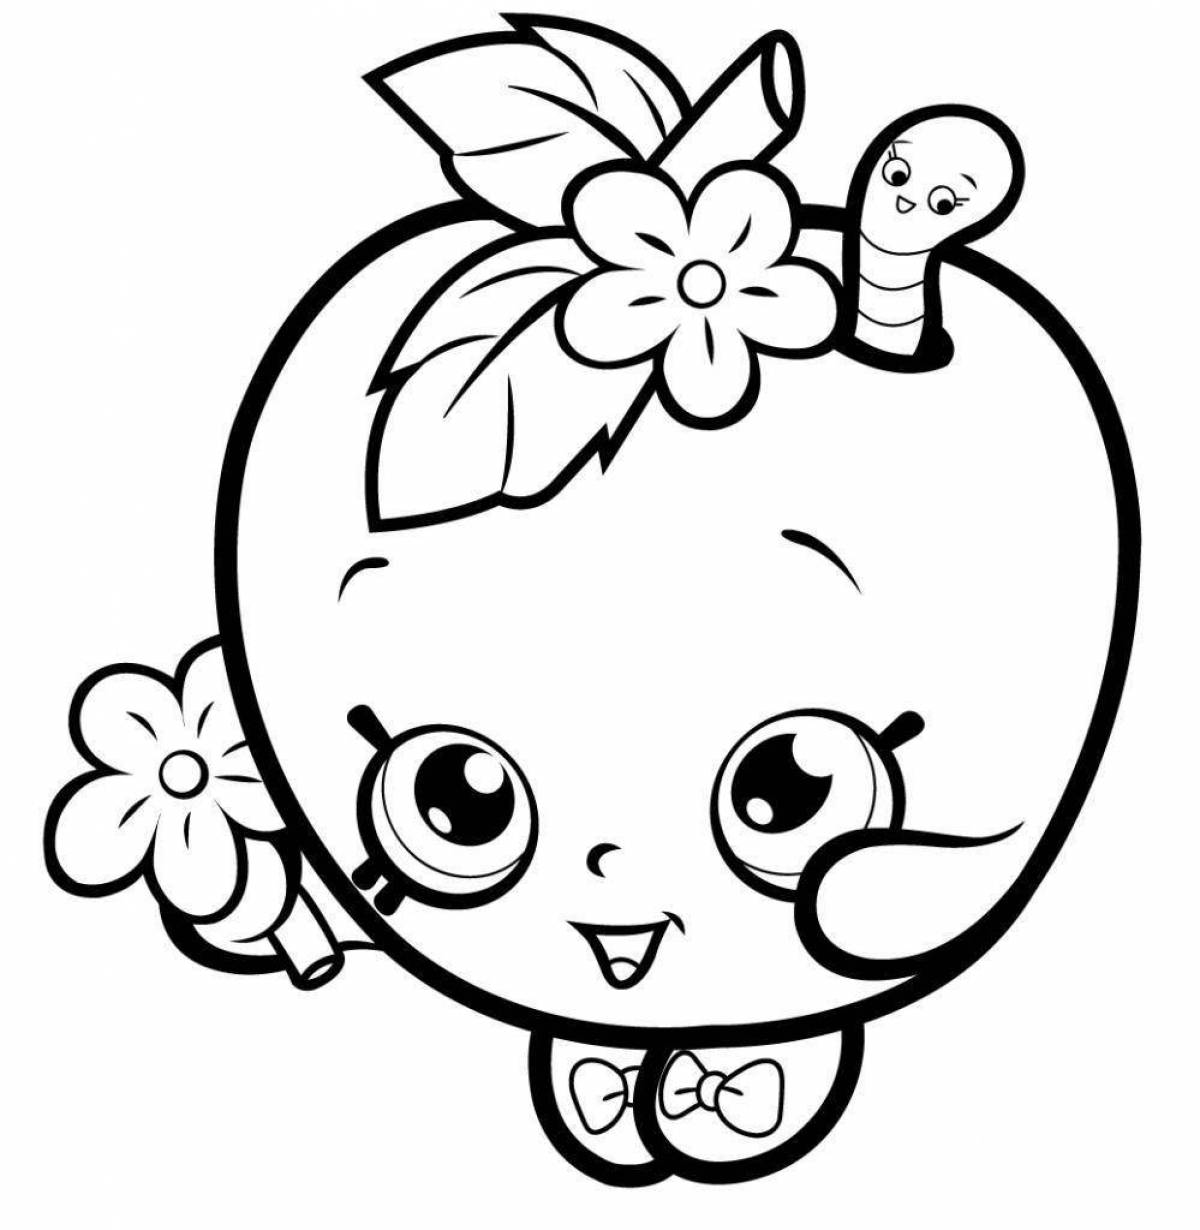 Shopkins amazing coloring pages for kids